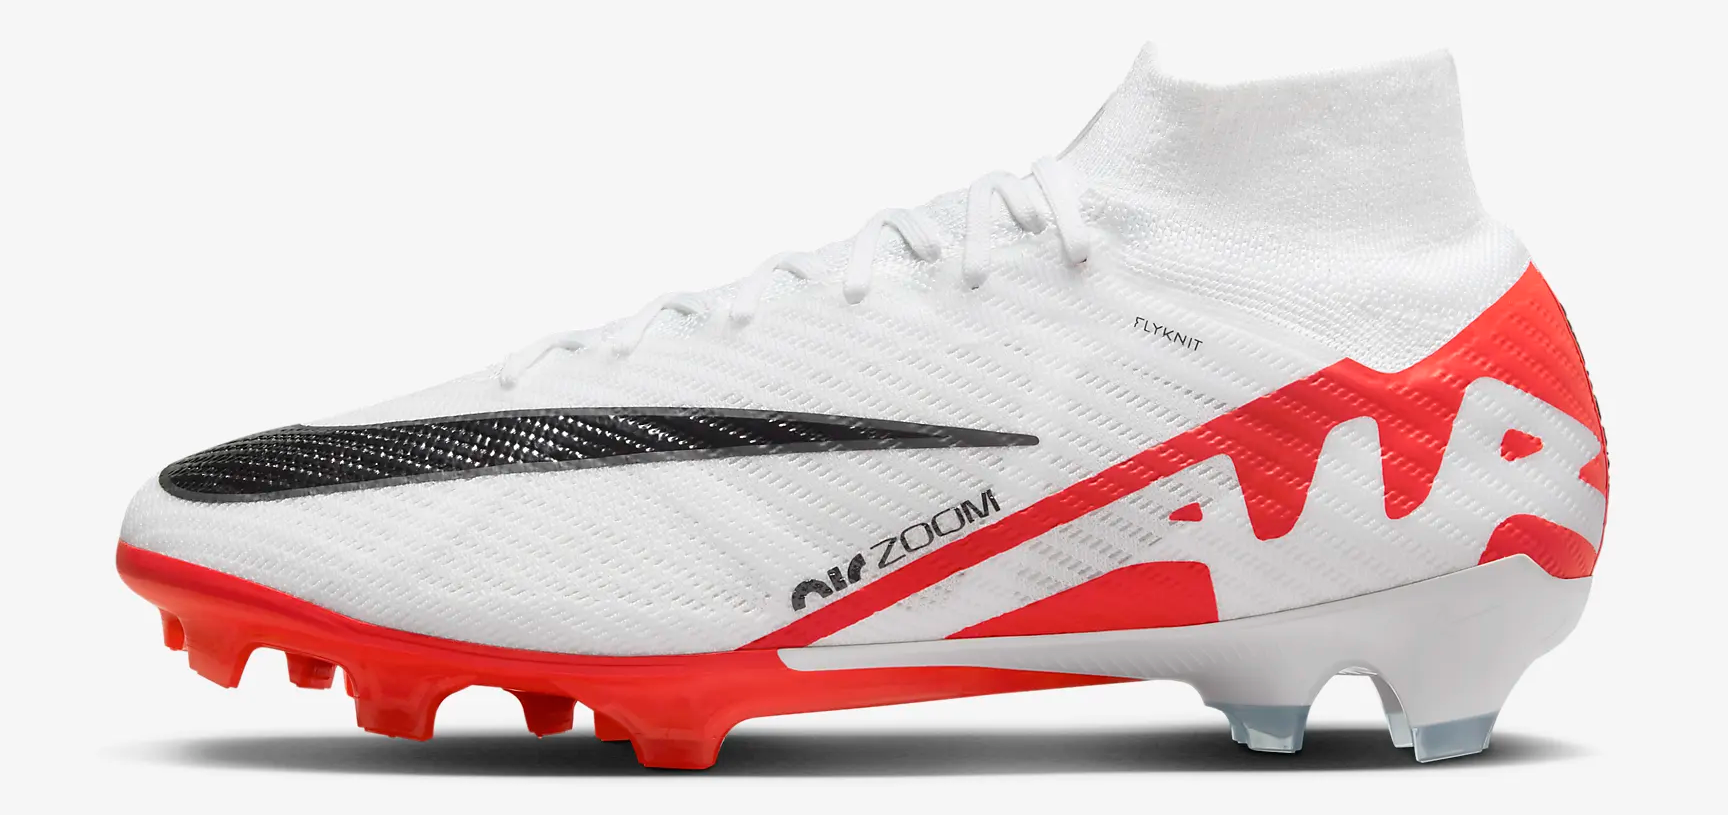 Cr7 Astro Boots Outlet, SAVE 58% 